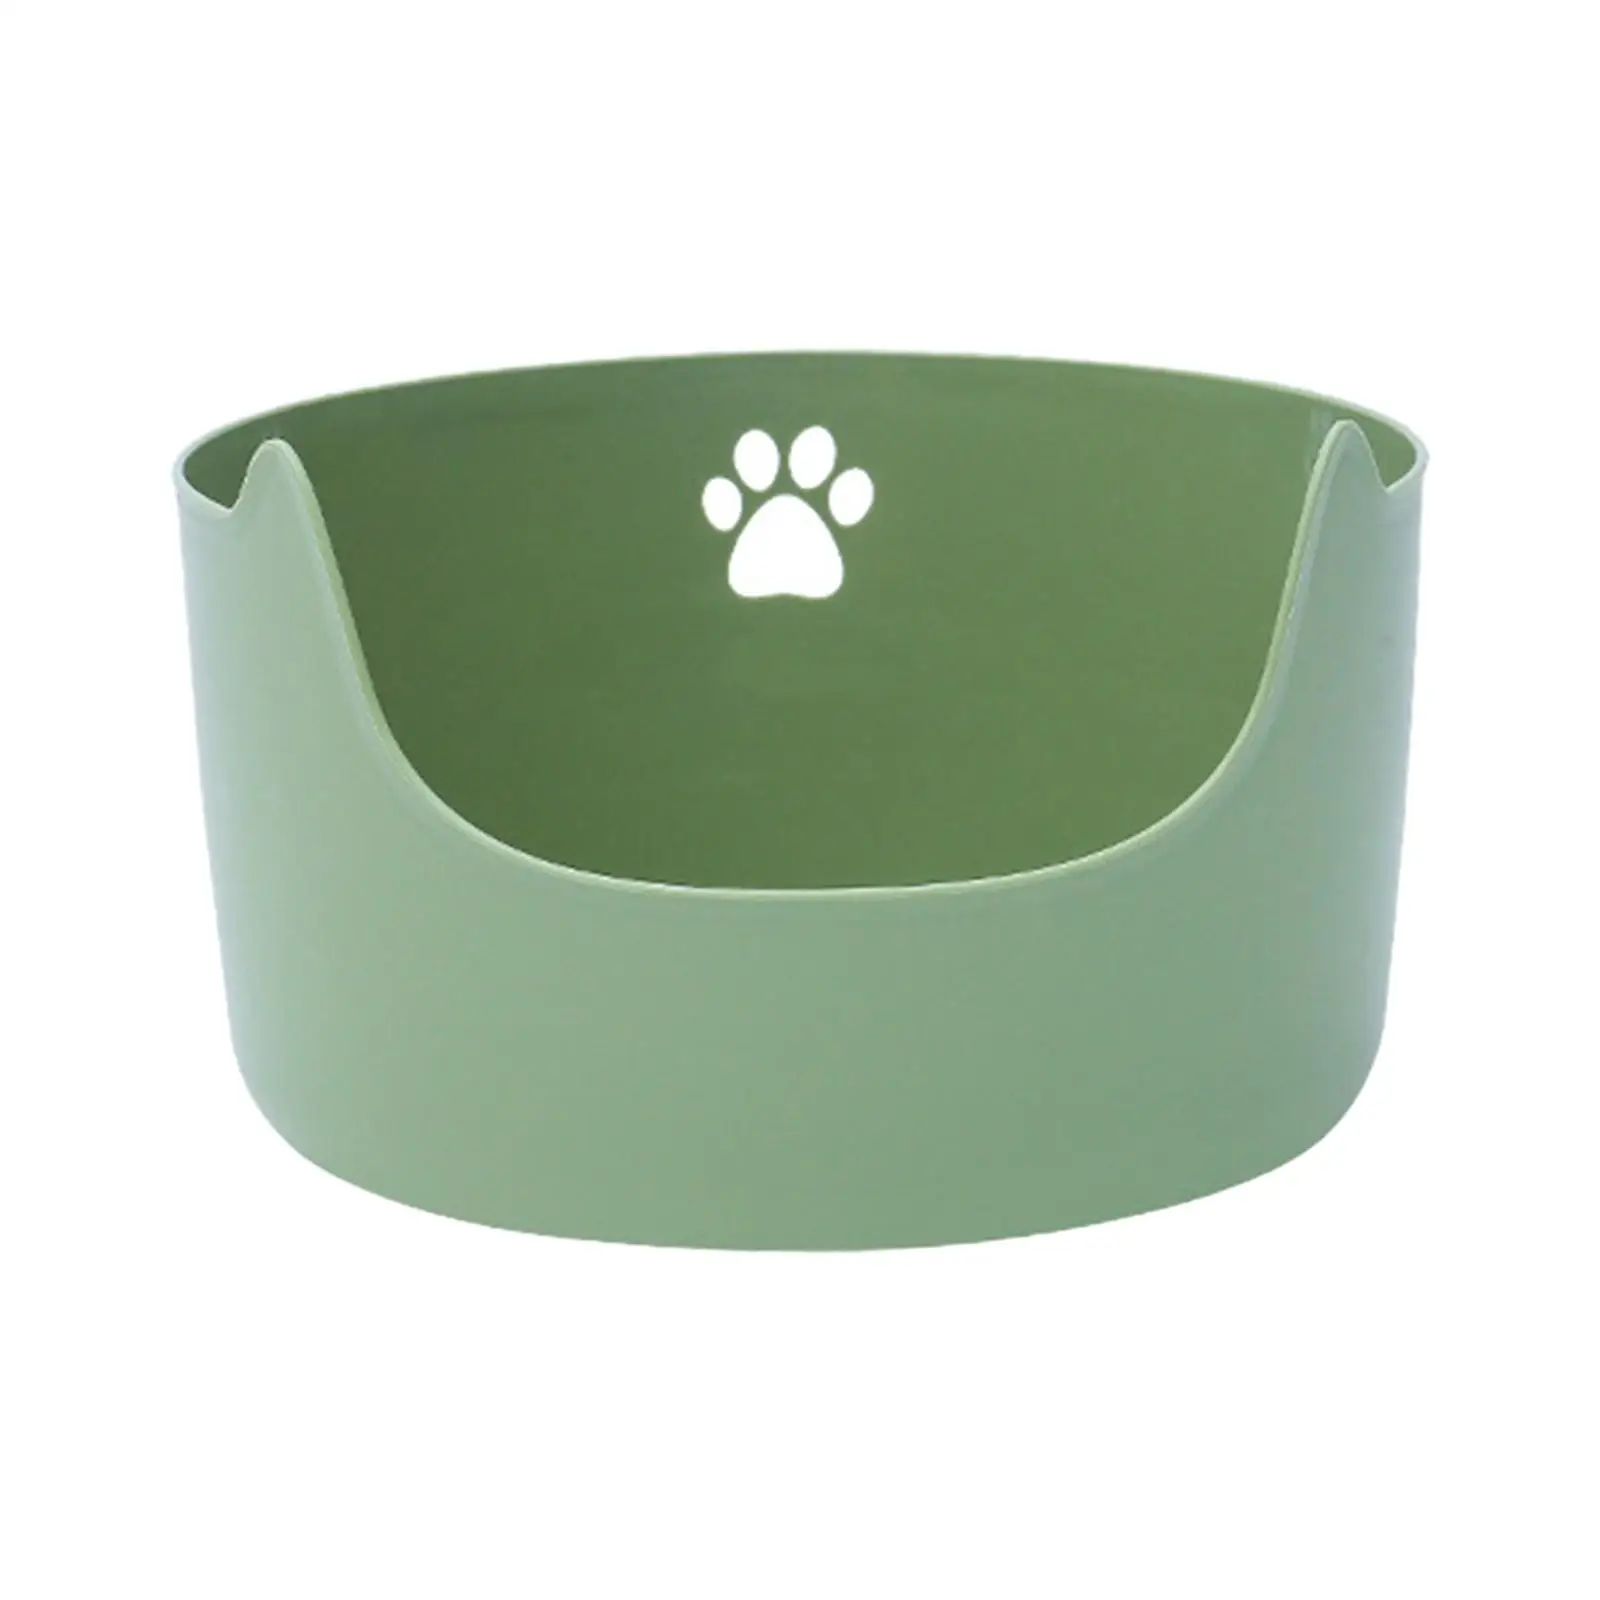 Cats Litter Pan with High Sides Nonstick Anti Splashing Pet Supplies Open Cats Litter Tray Extra Large Cat Cleaning Bath Basin